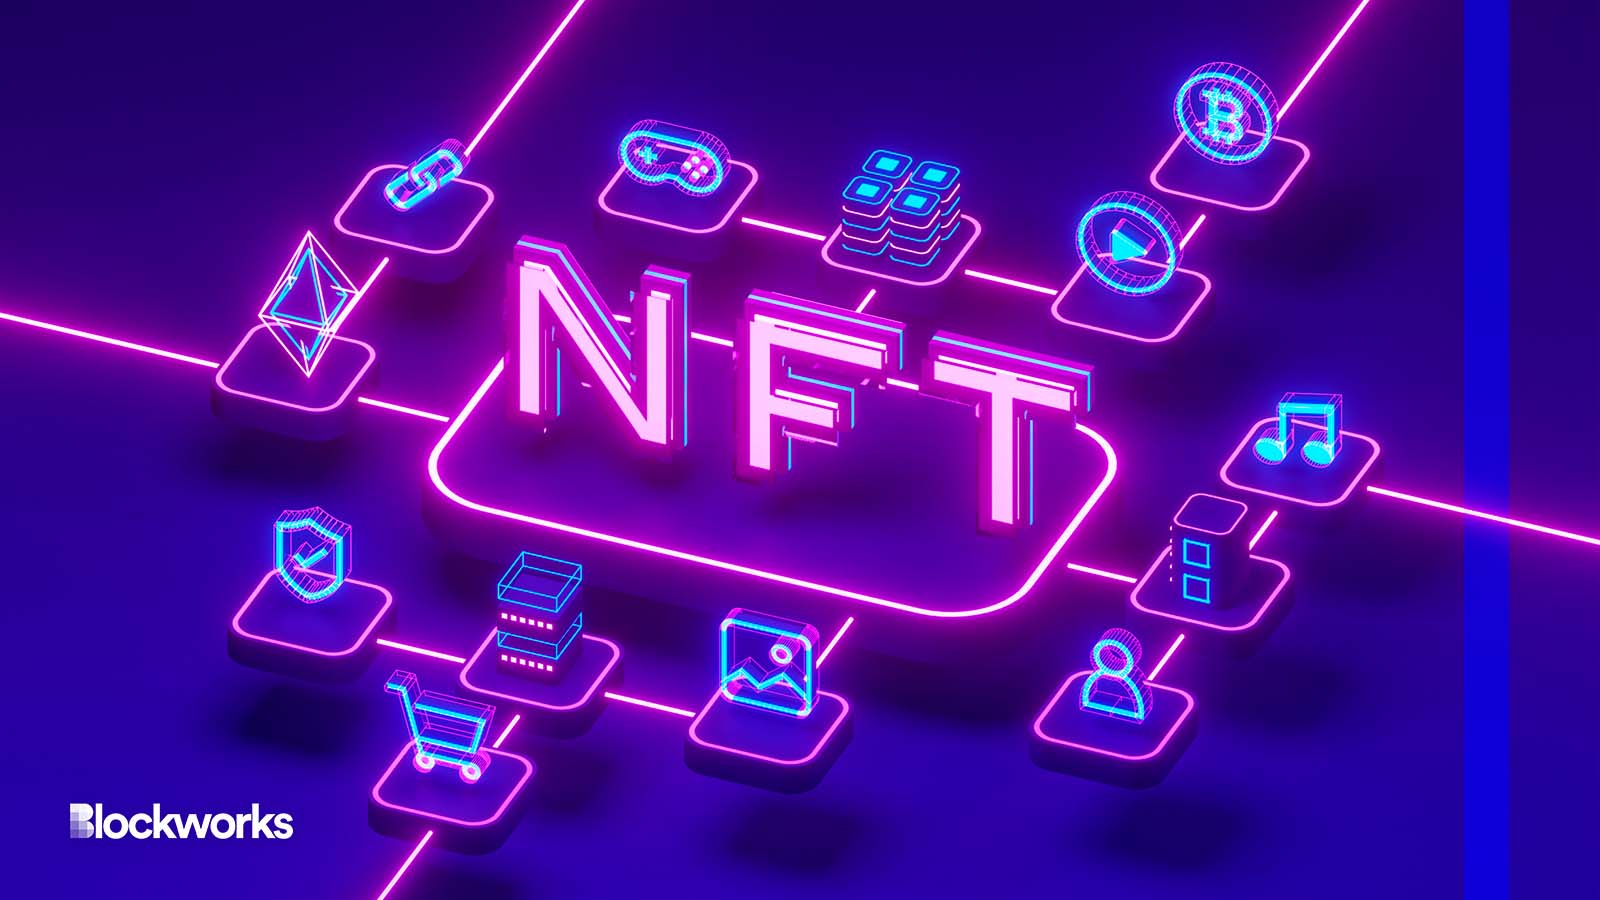 6 Projects Using NFTs for Social Good